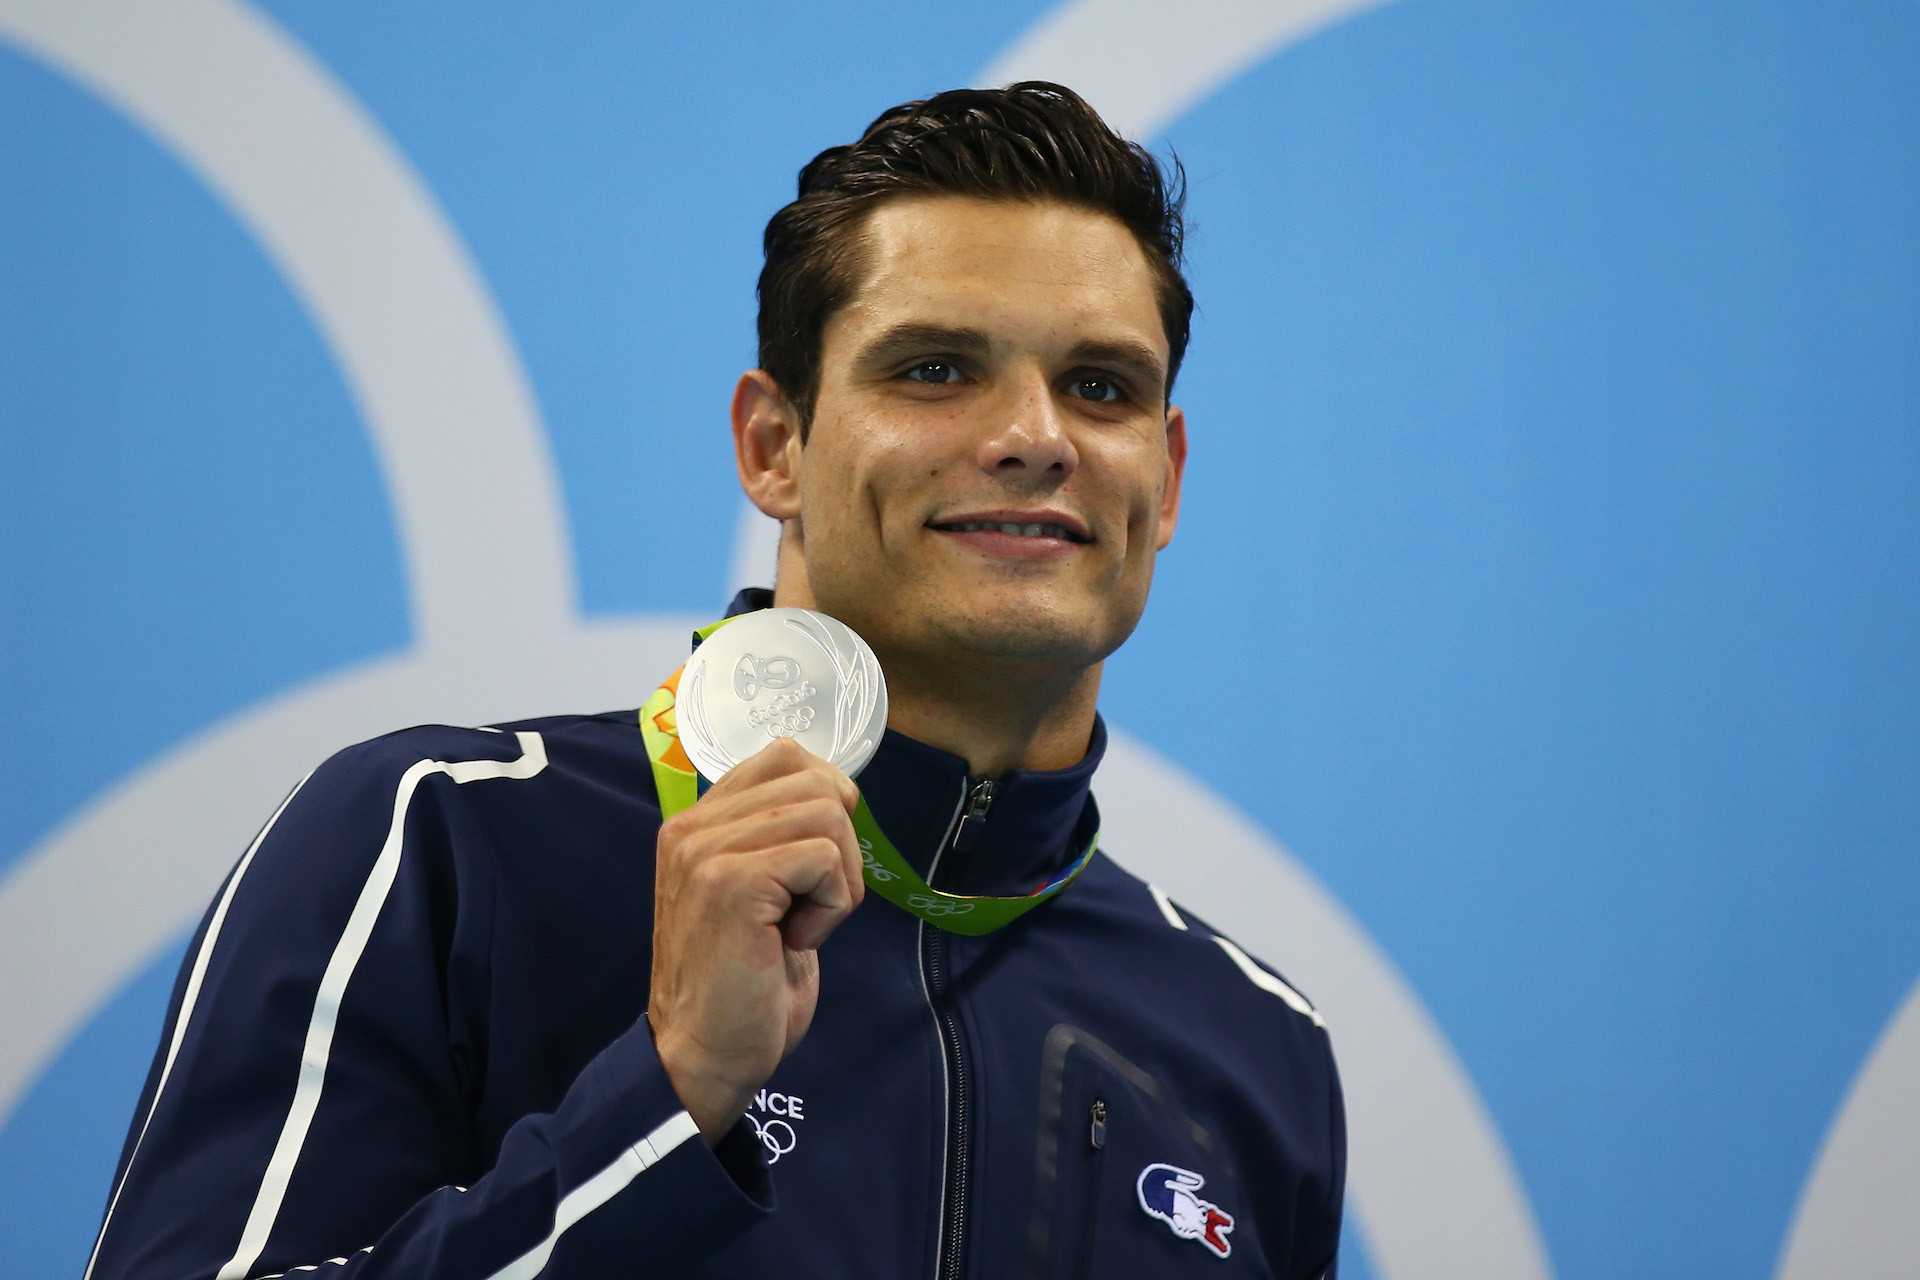 Florent Manaudou takes silver in the 50m Freestyle in Rio 2016. GETTY IMAGES